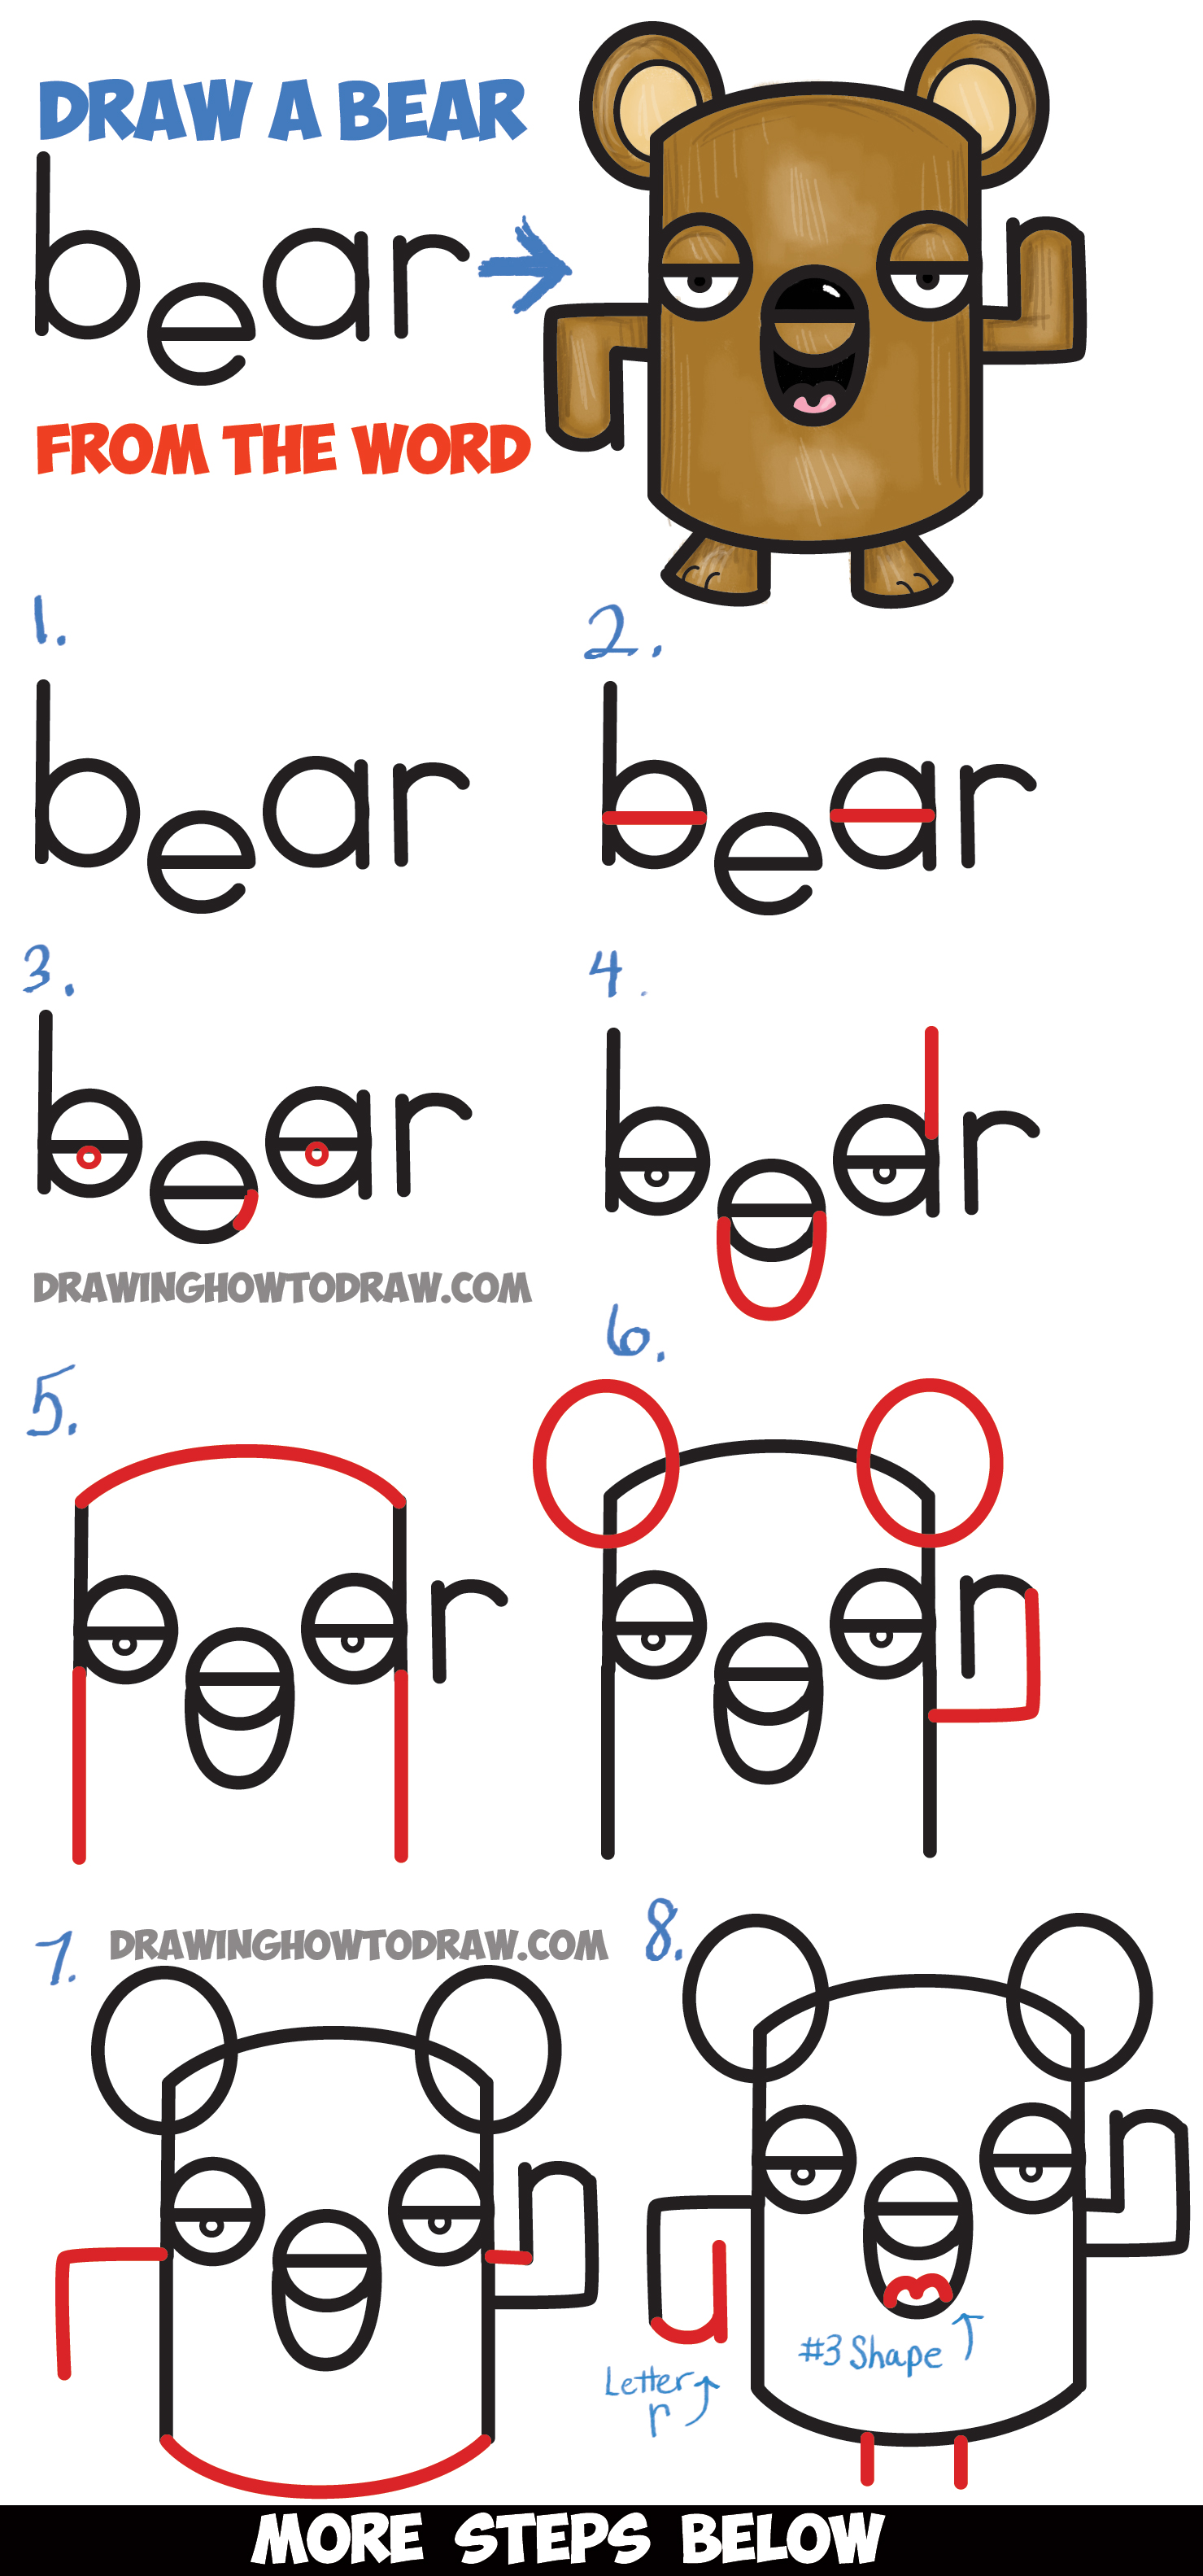 Learn How to Draw a Cartoon Bear from the Word Bear - Easy Step by Step Draiwng Lesson for Kids